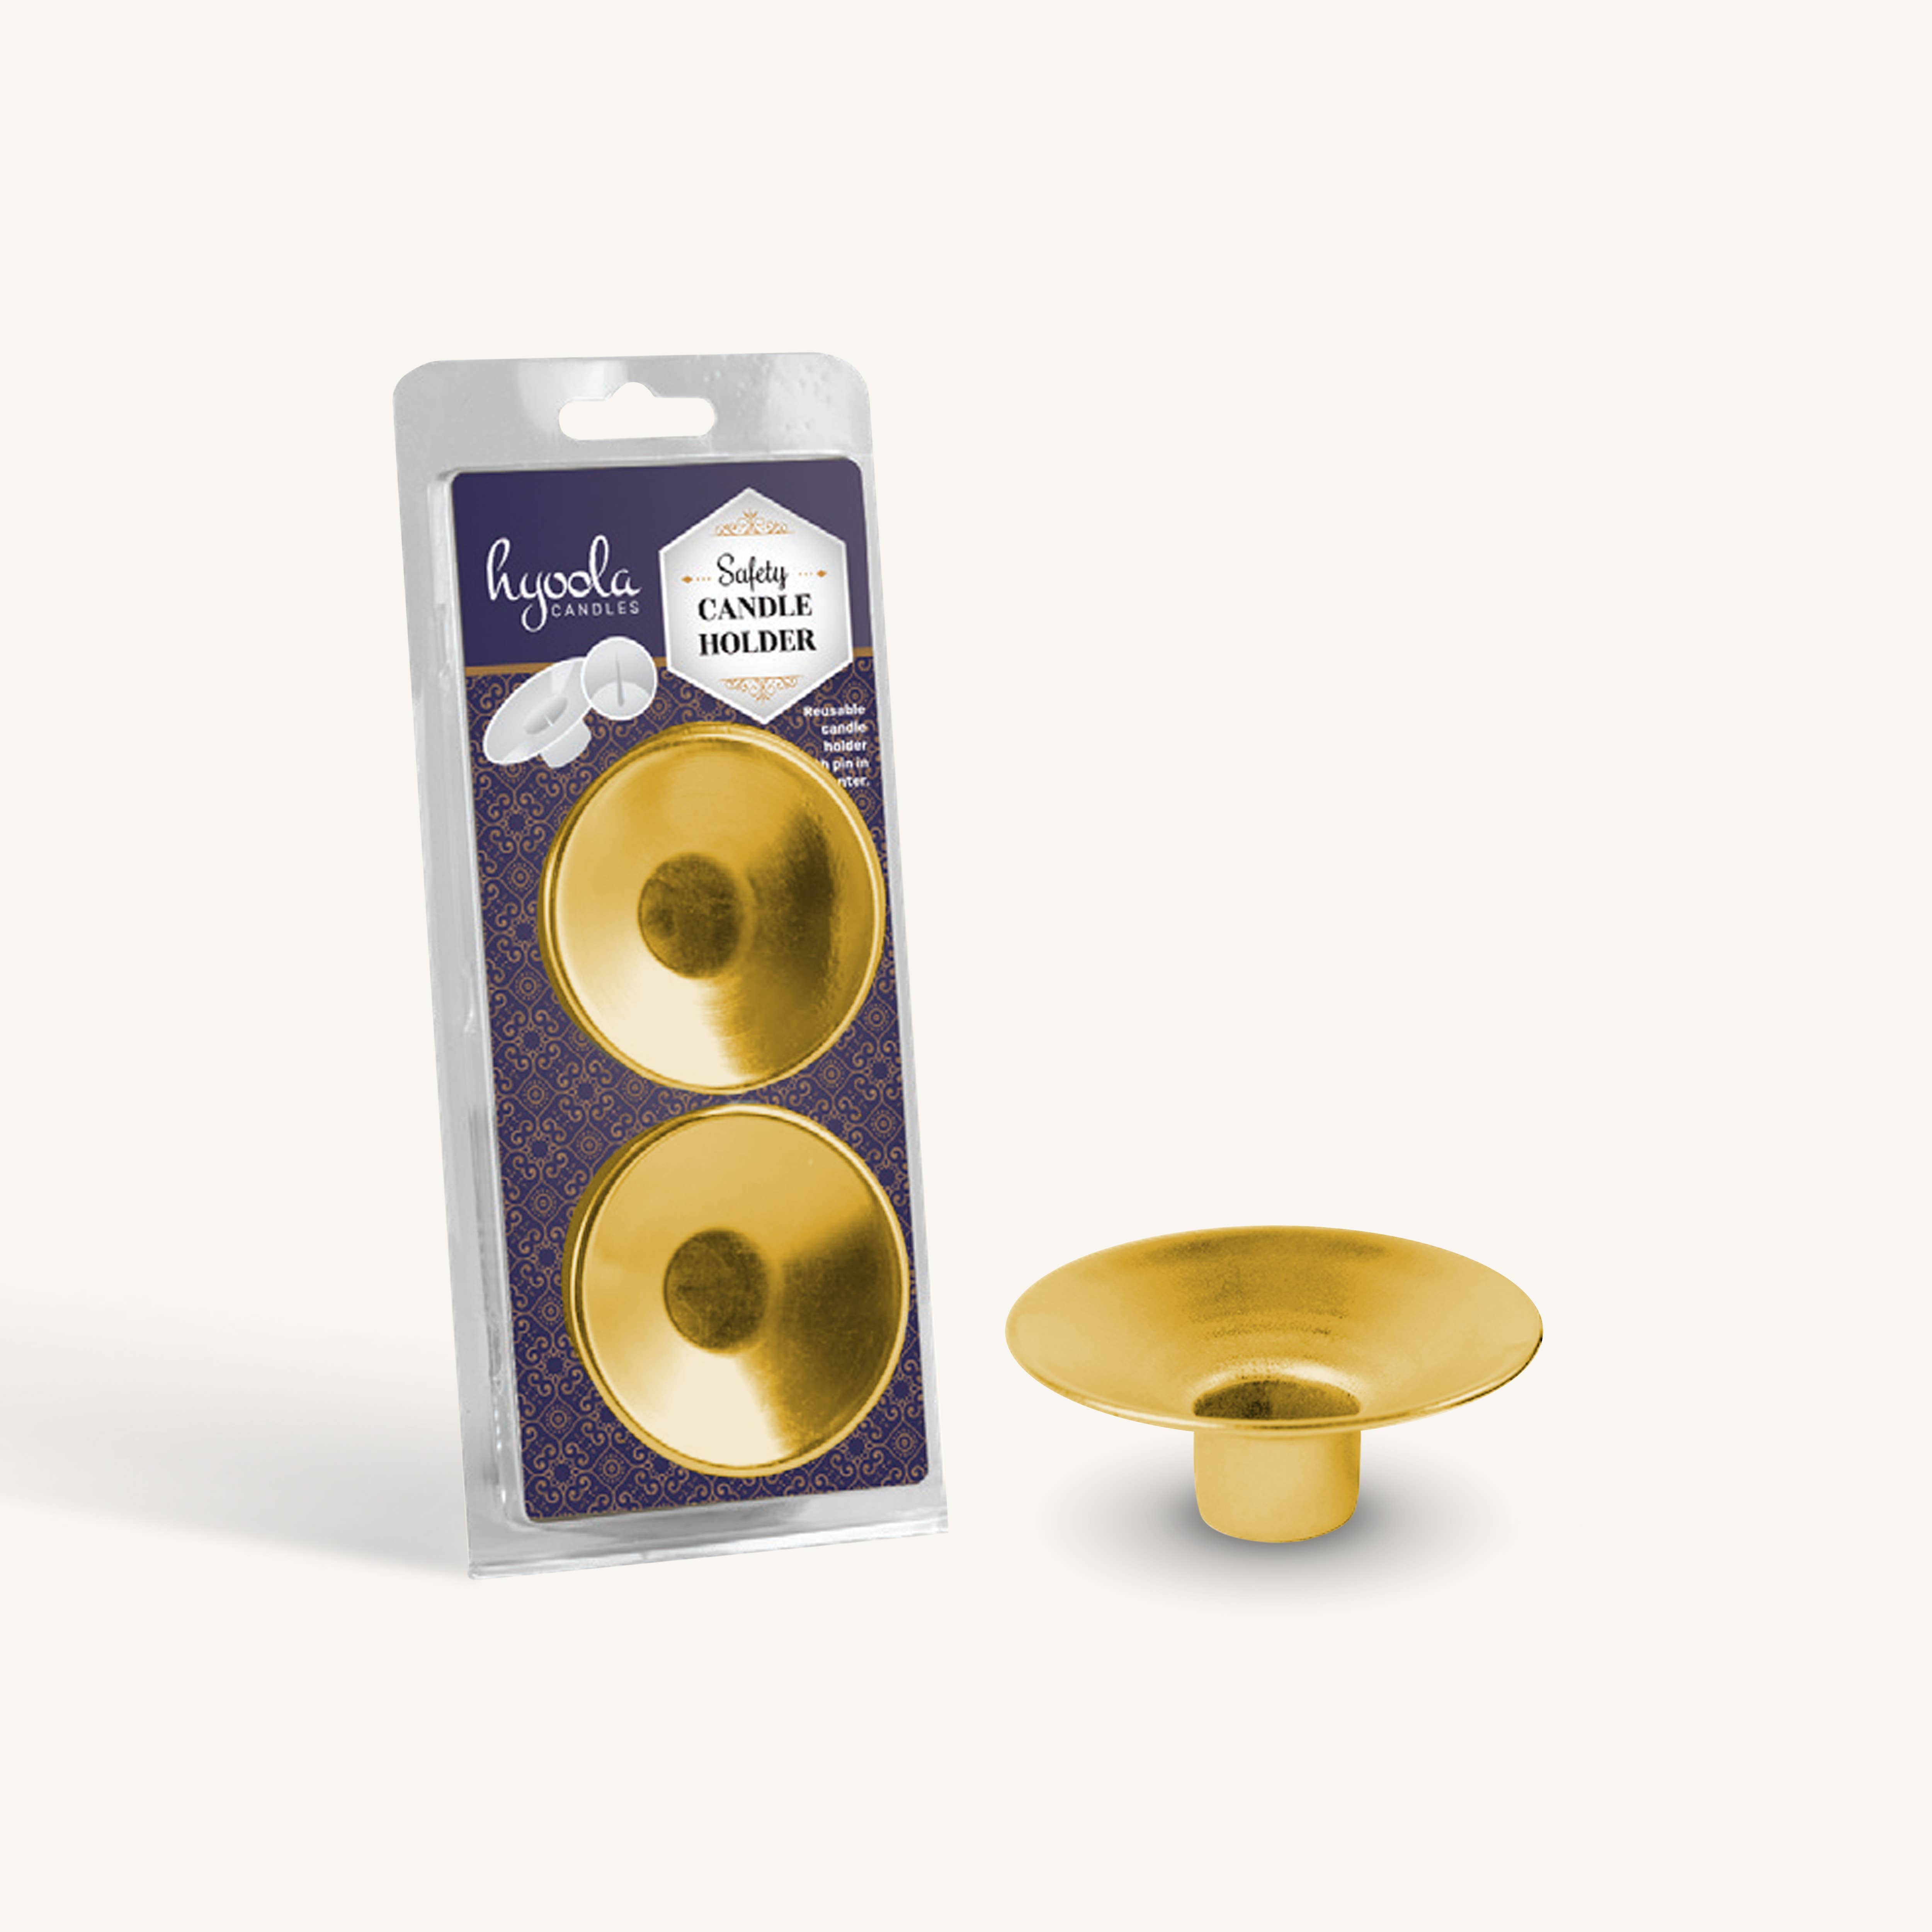 Safety Candle Holder - Gold - 2 Pack